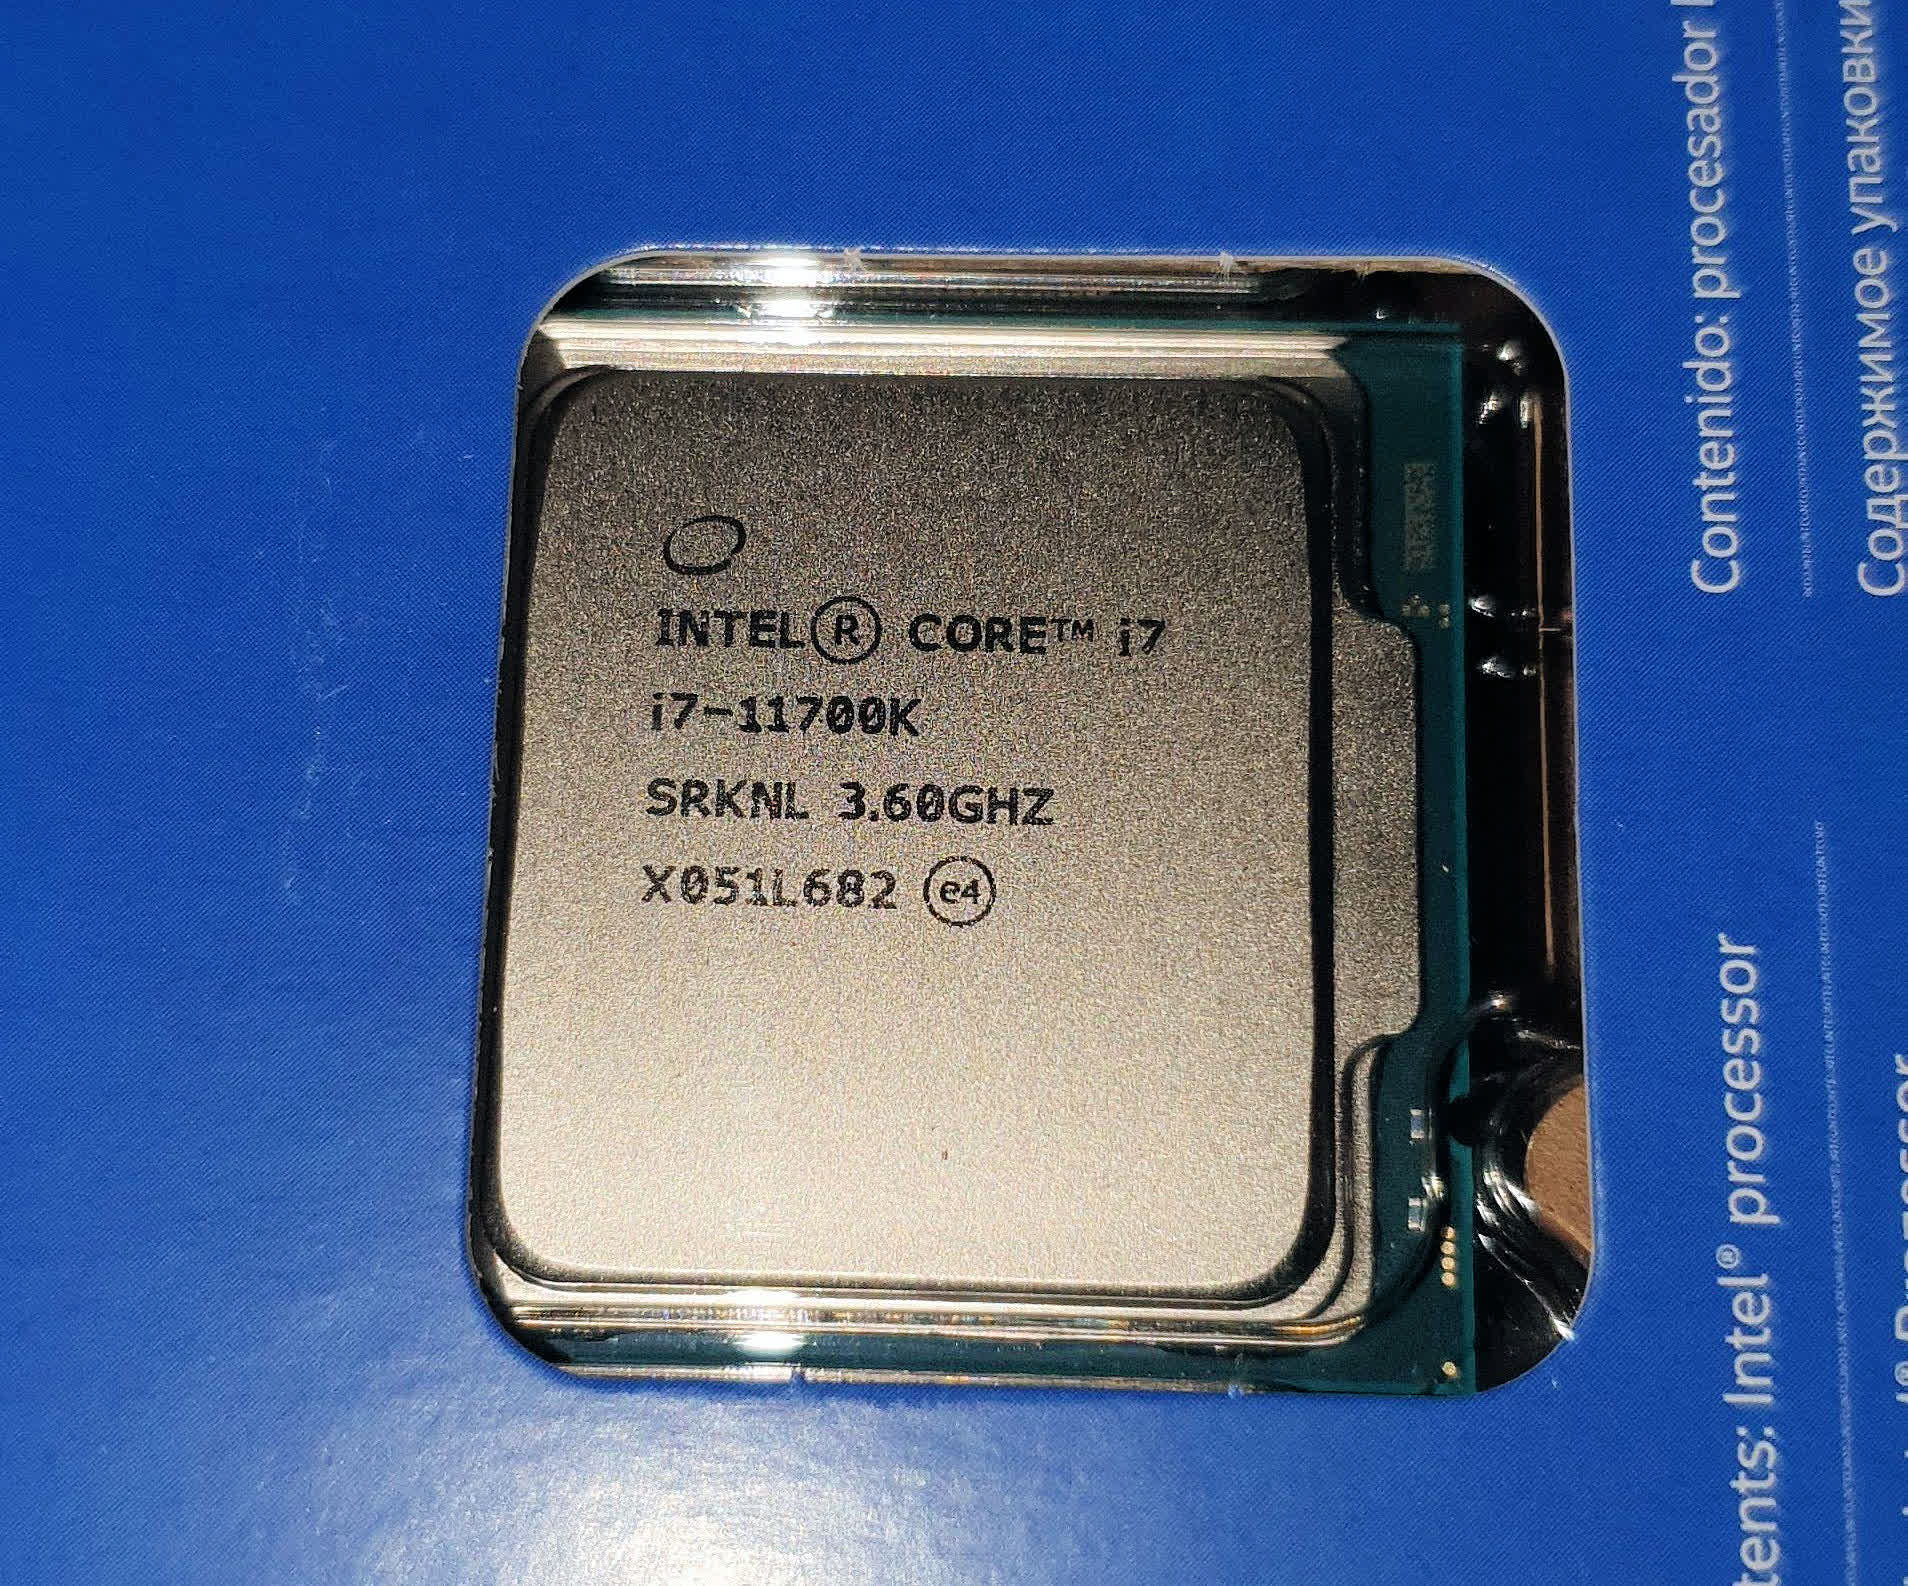 Intel's unreleased i7-11700K is being sold and shipped in Germany 